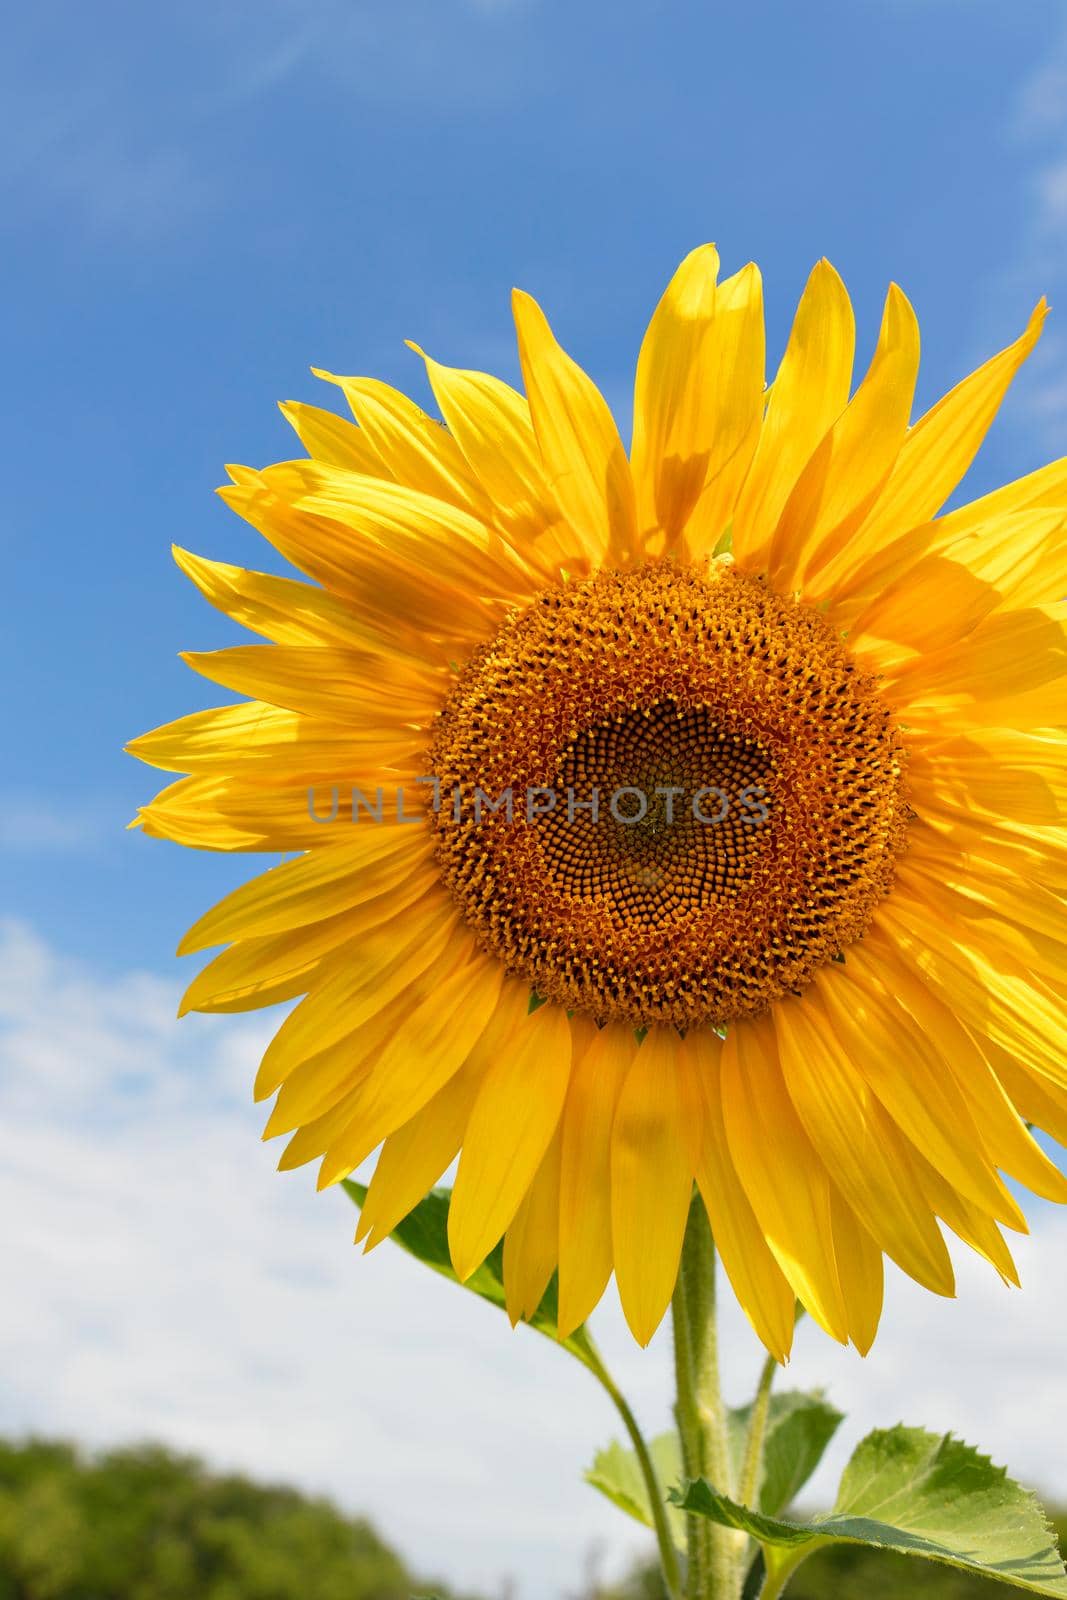 Big orange blooming sunflower against blue sky and green field in blur. Vertical image, high resolution, close-up, copy space.